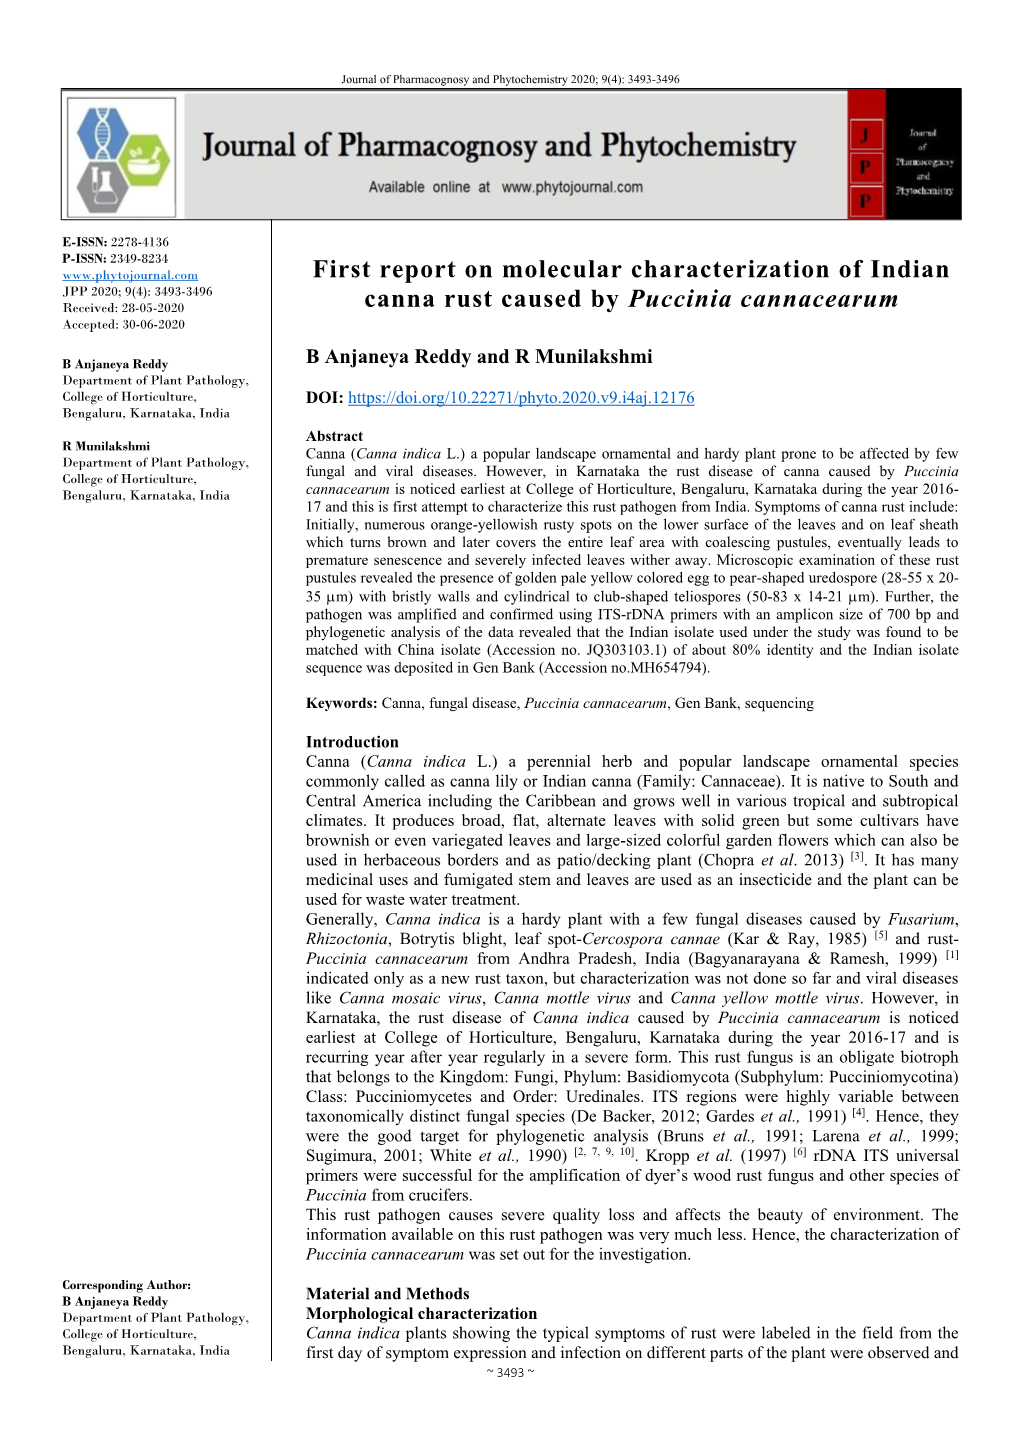 First Report on Molecular Characterization of Indian Canna